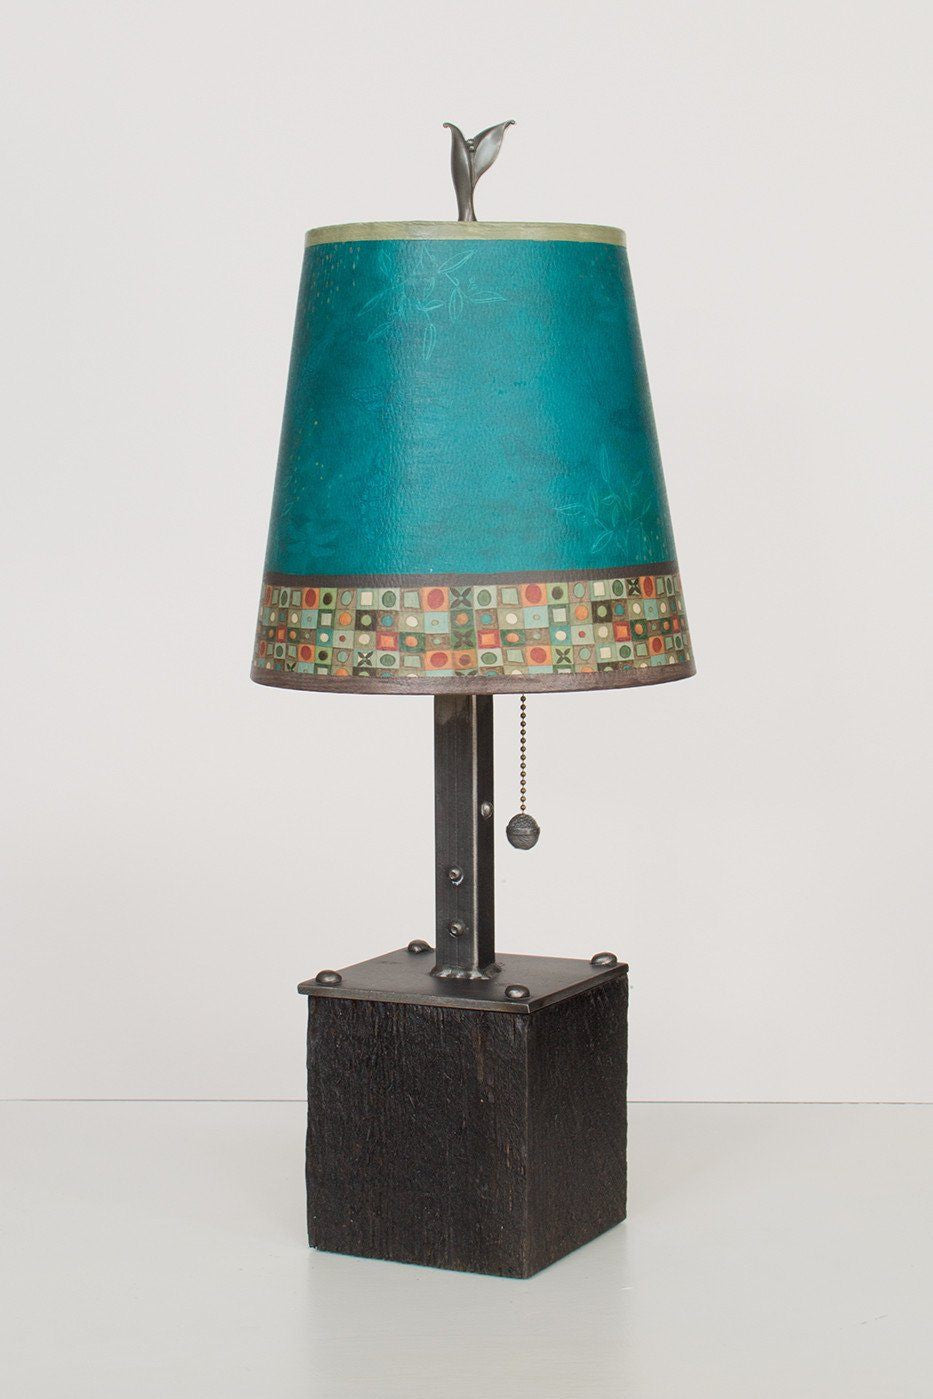 Steel Table Lamp on Reclaimed Wood with Small Drum Shade in Jade Mosaic Lit